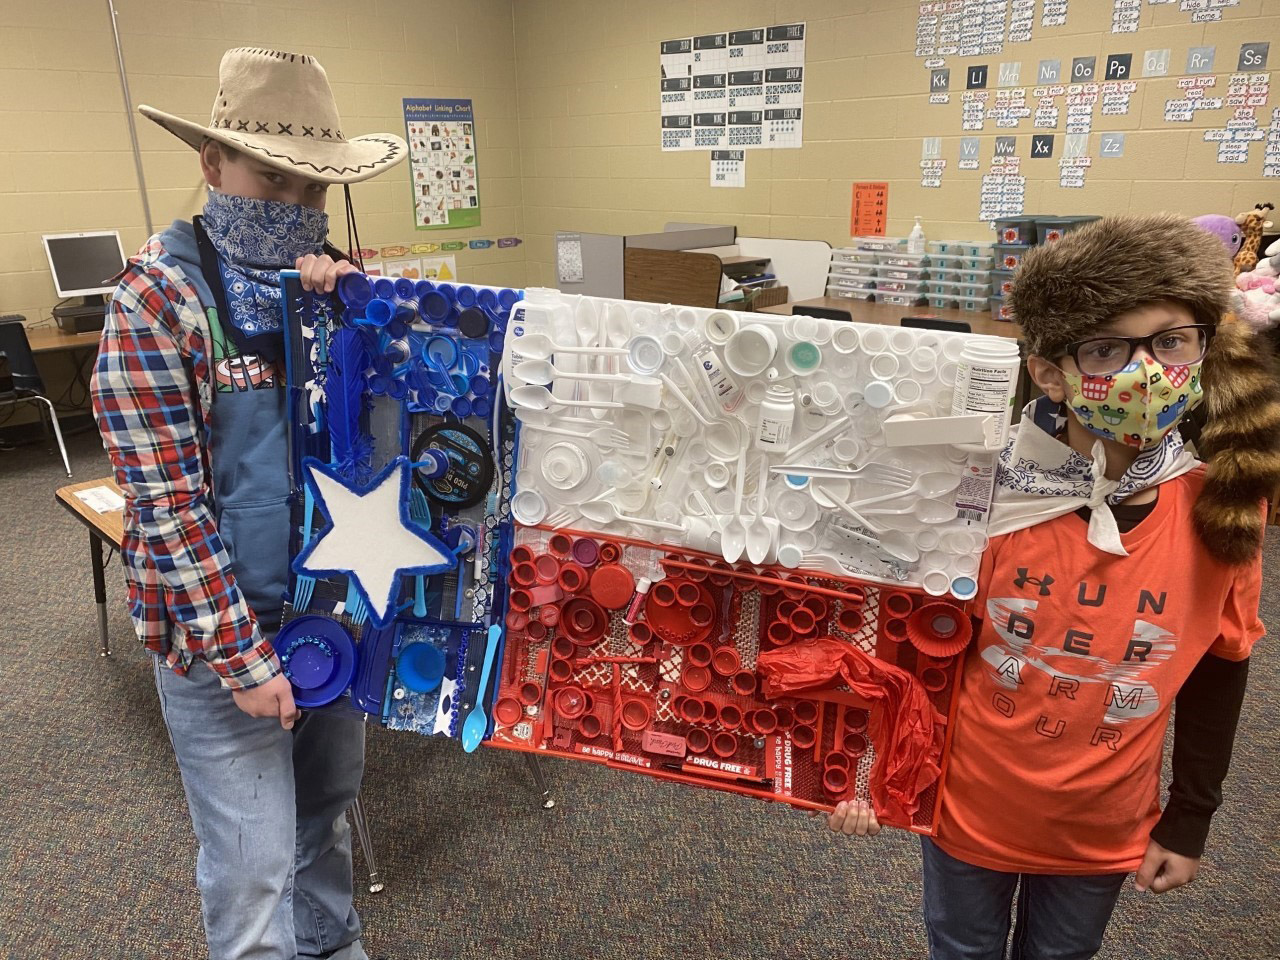 Two students smile while holding a Texas flag made from recycled materials.